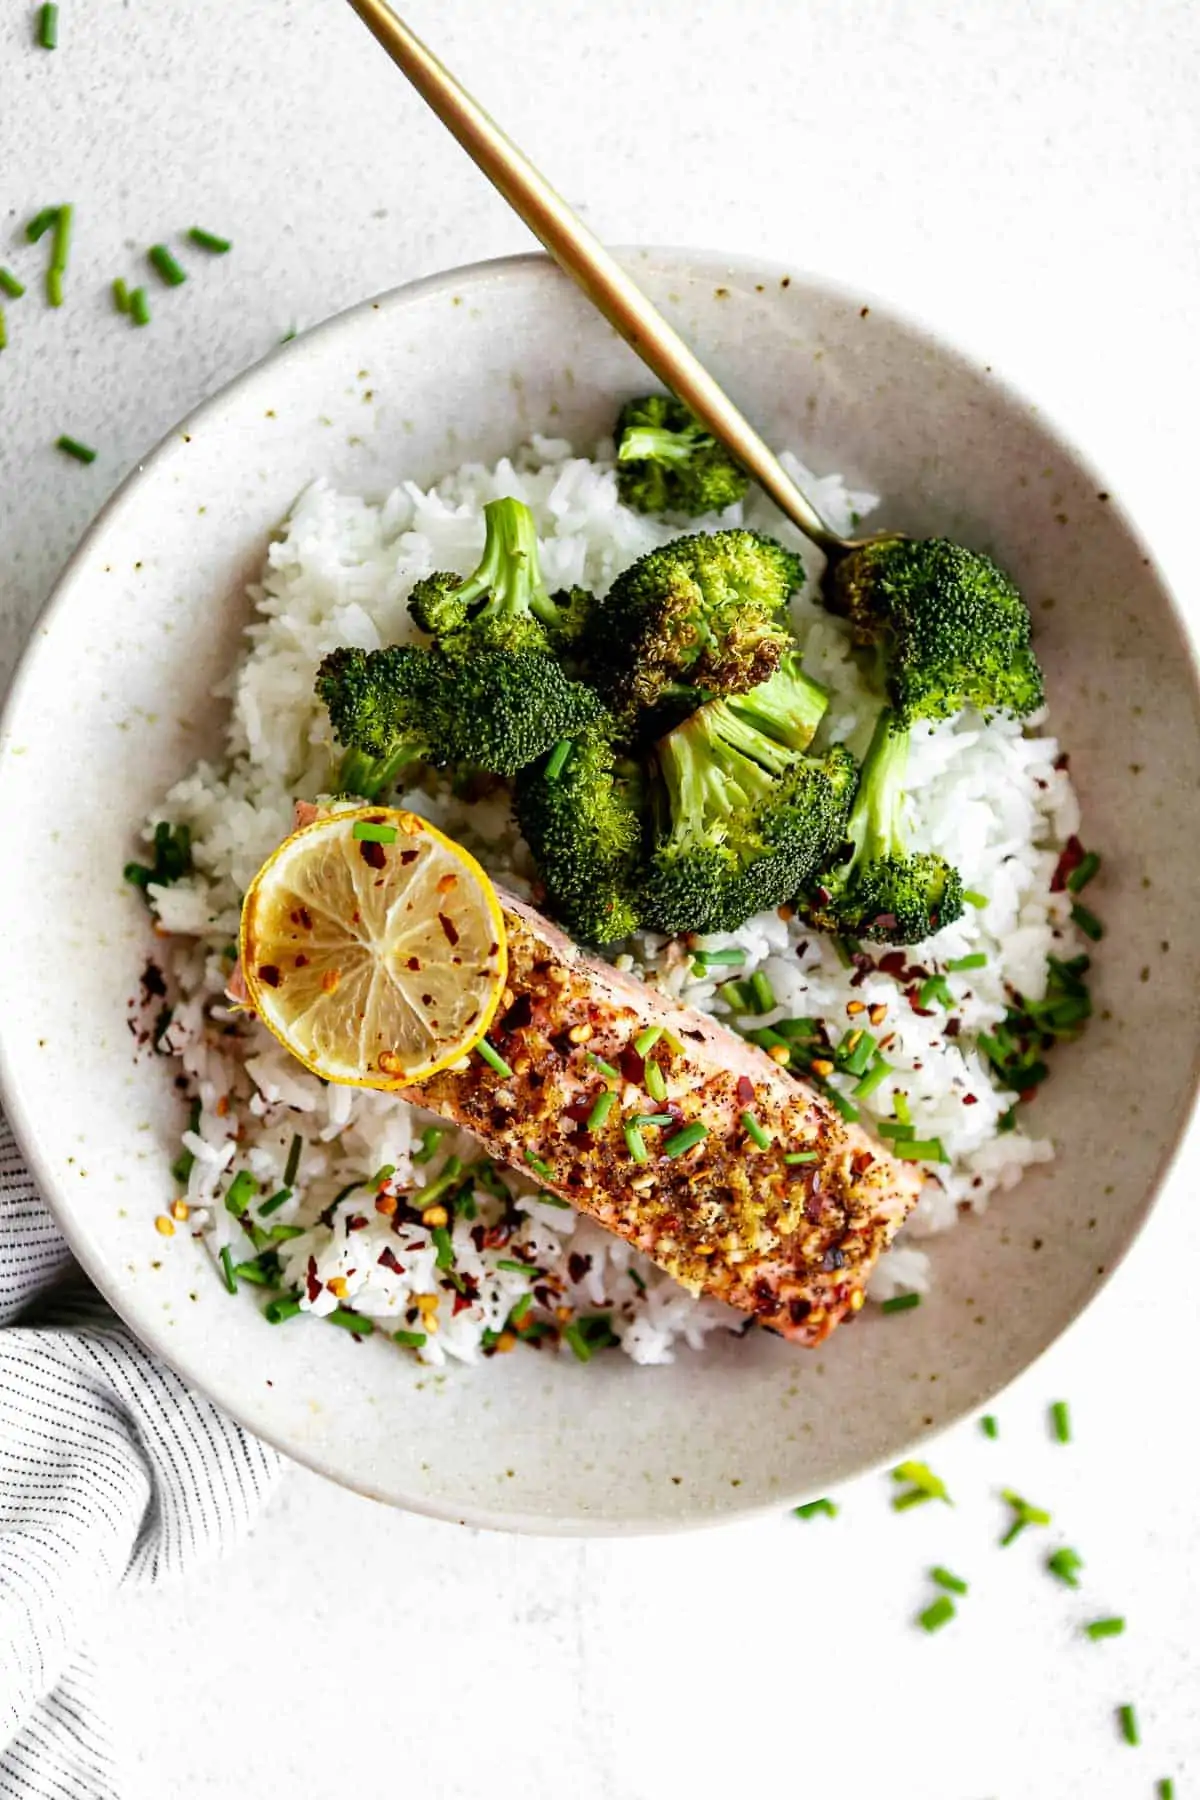 lemon pepper salmon in a bowl with rice and broccoli